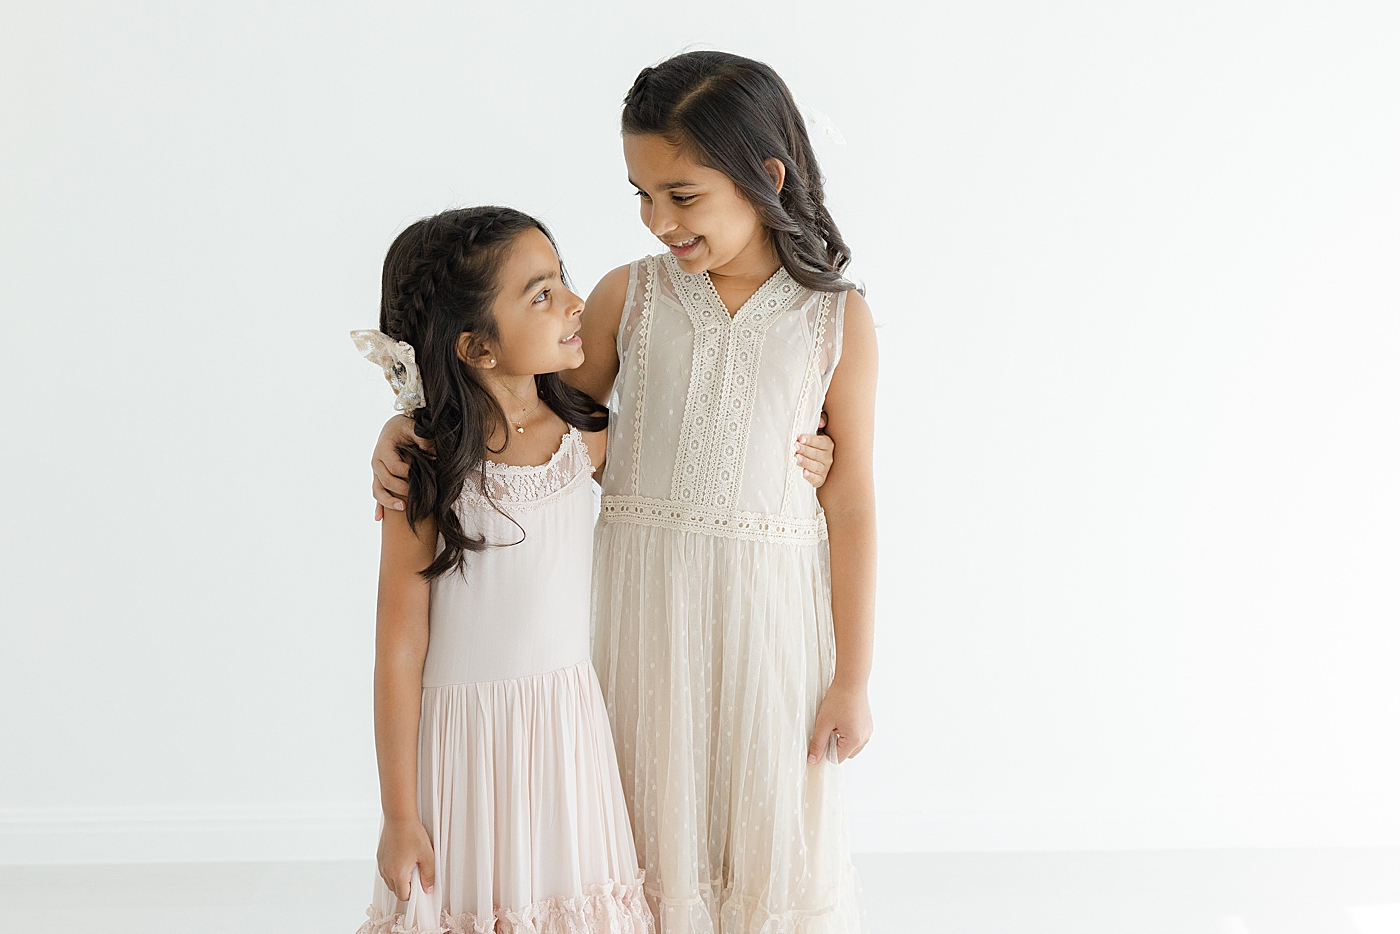 Two sisters in long neutral dresses hugging | Image by Sana Ahmed Photography